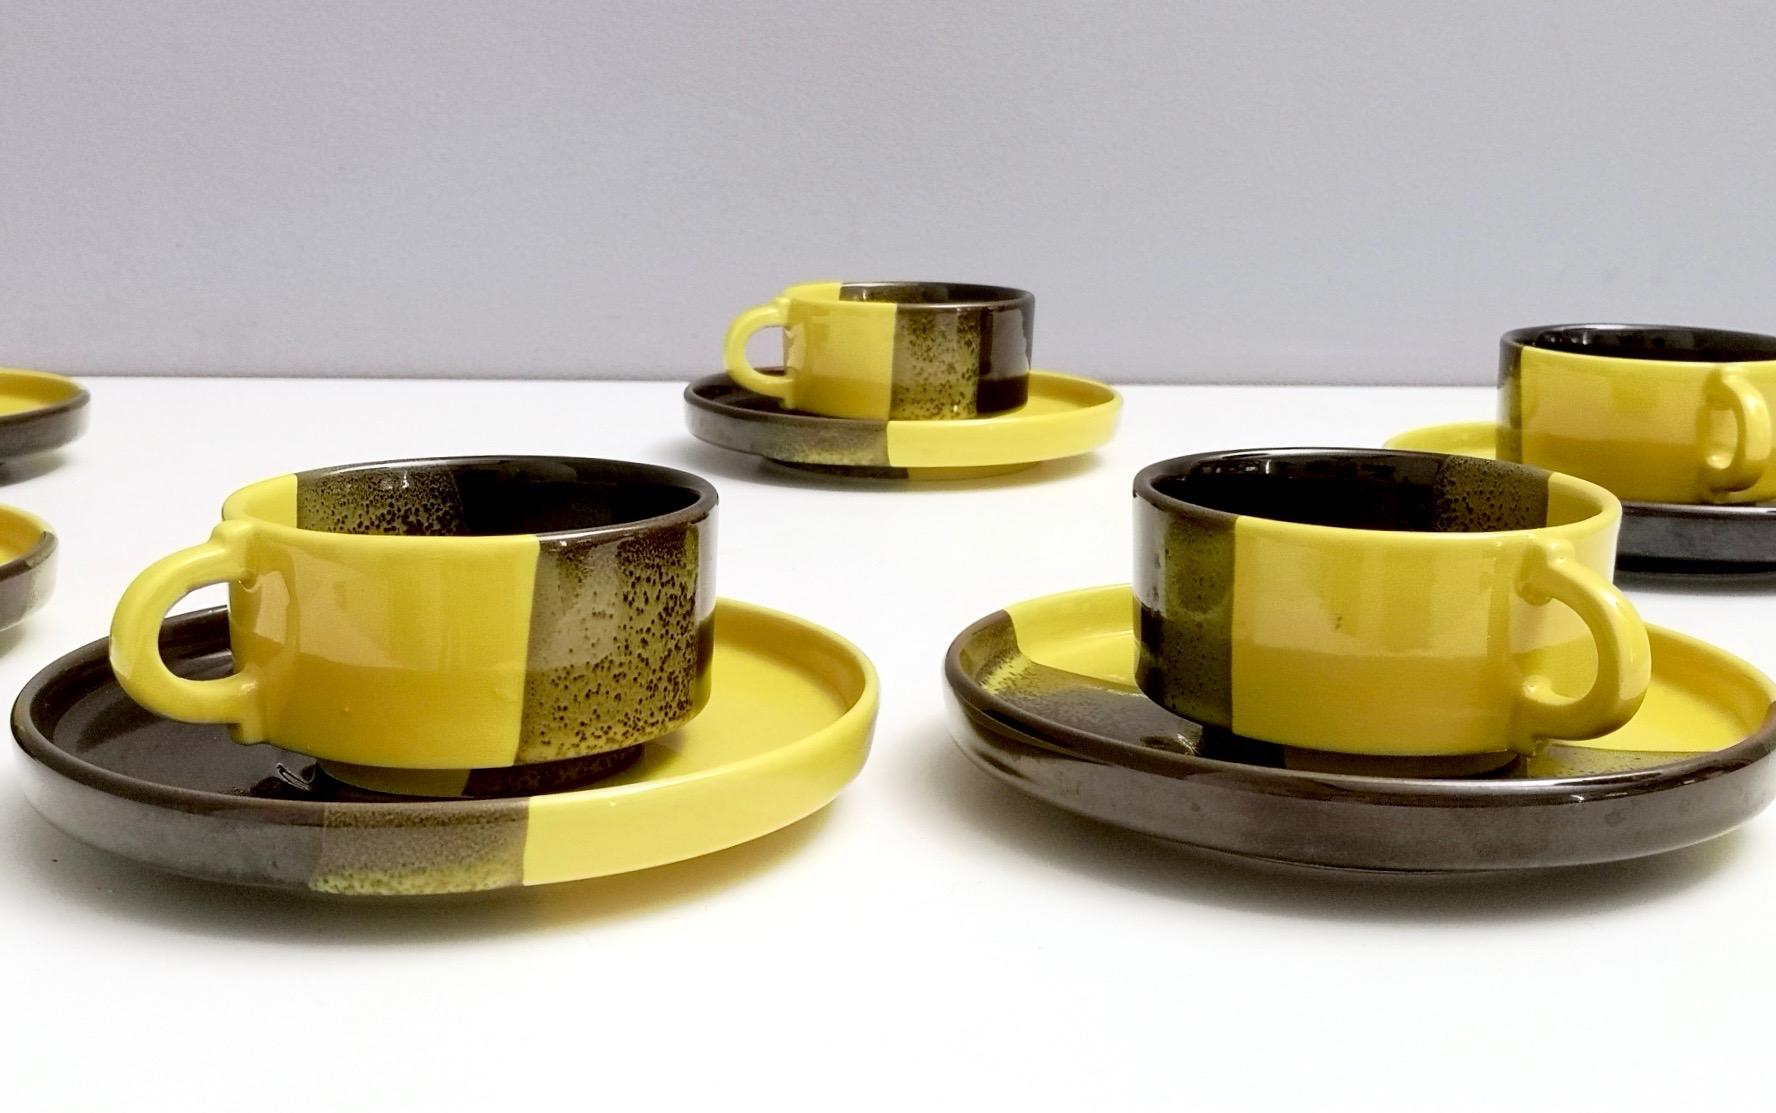 Lacquered Set of Six Black, Olive Green and Yellow Cups by SIC Ceramiche Artistiche, 1970s